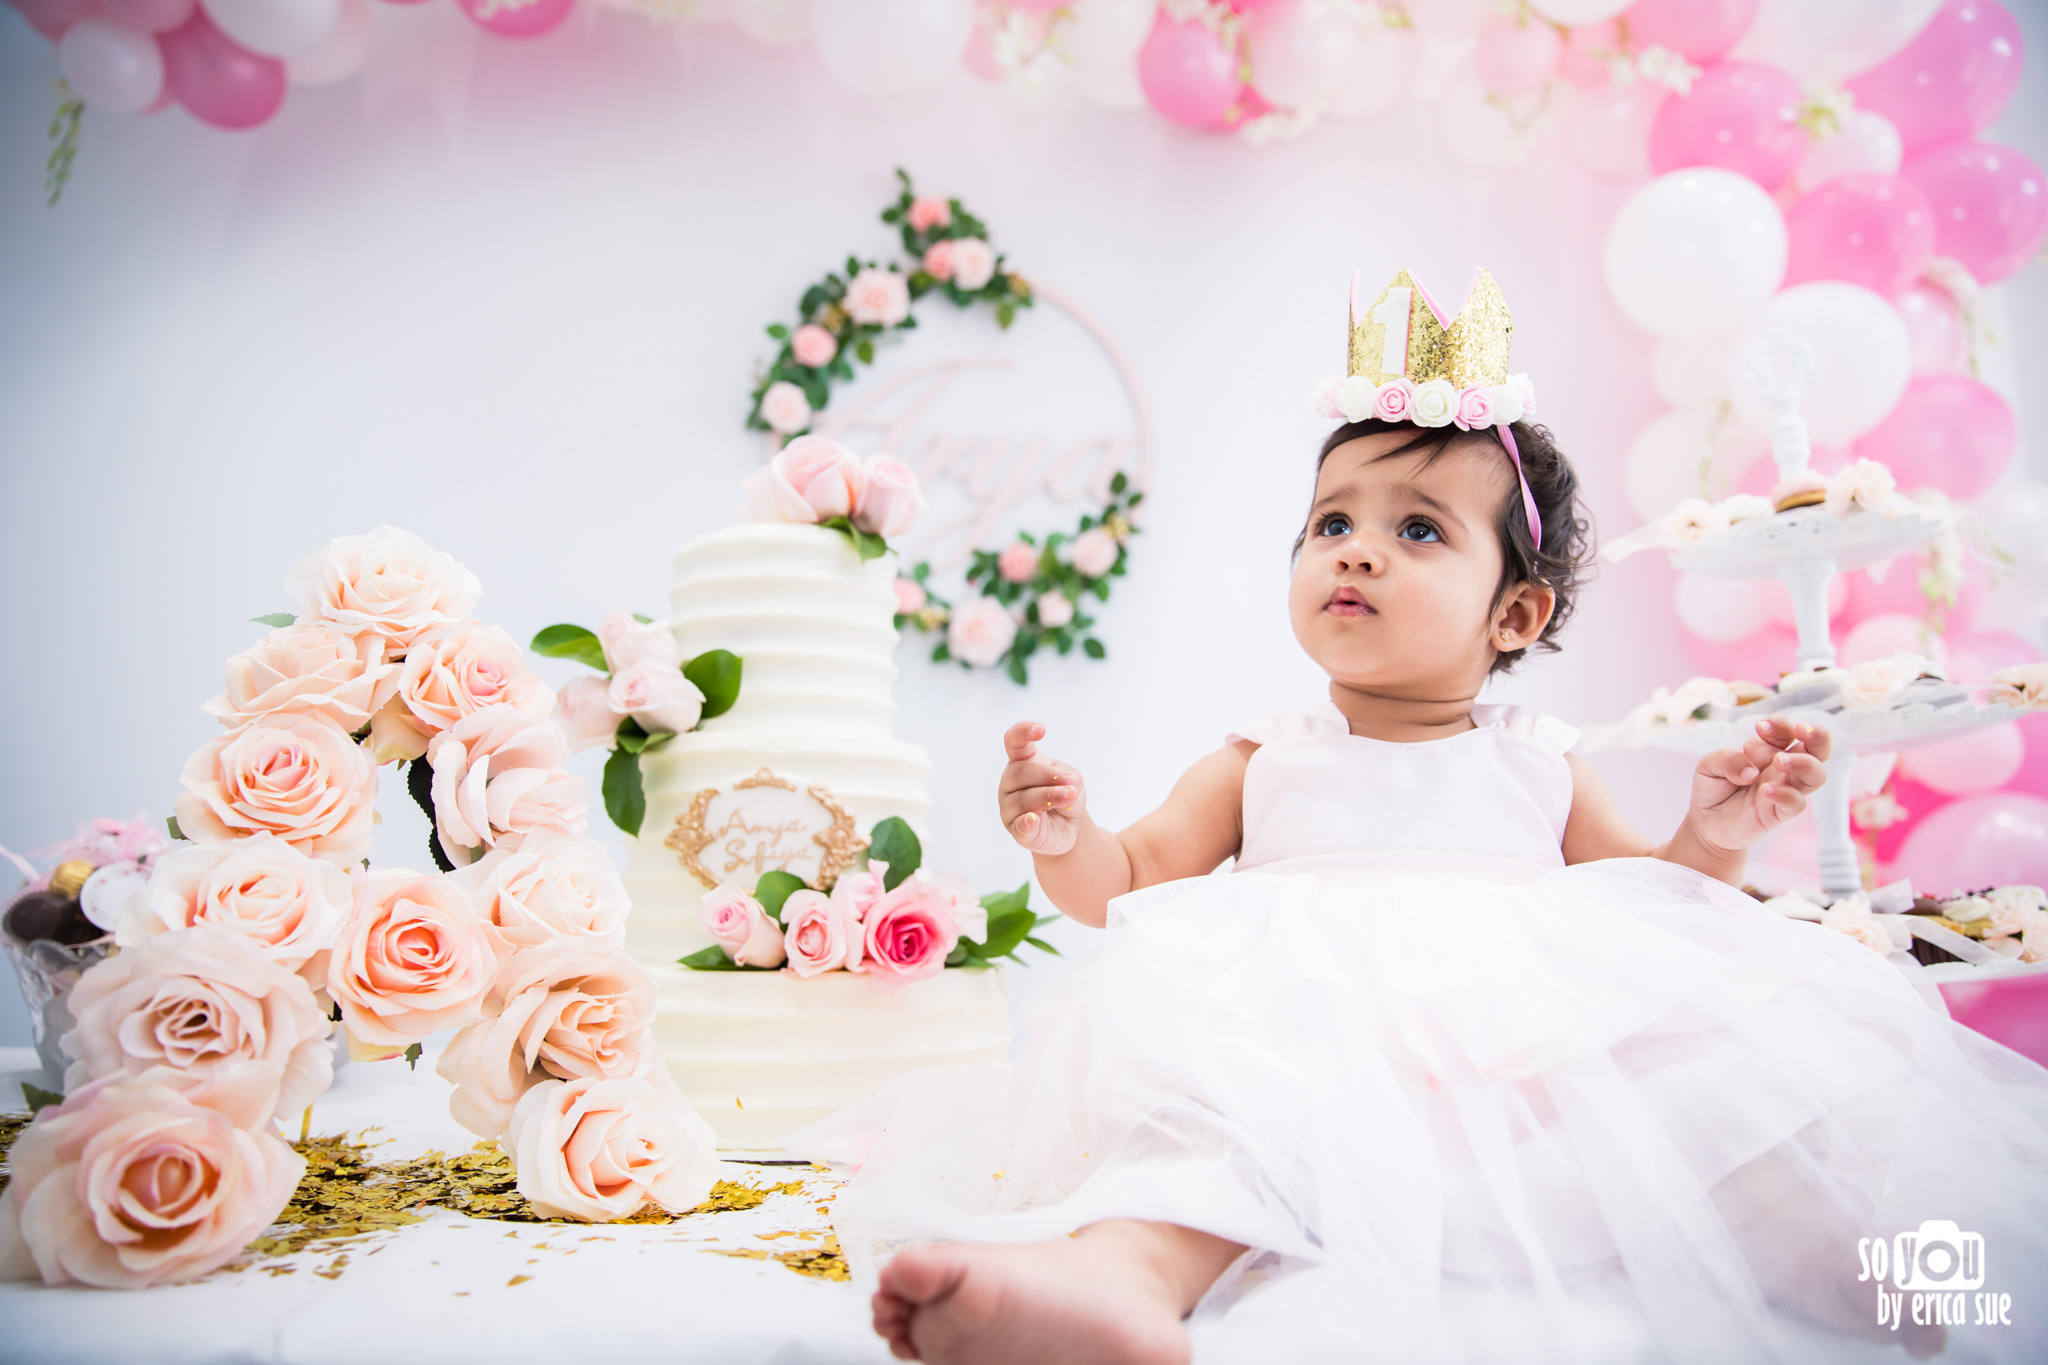 so-you-by-erica-sue-first-birthday-photographer-pembroke-pines-5462.jpg